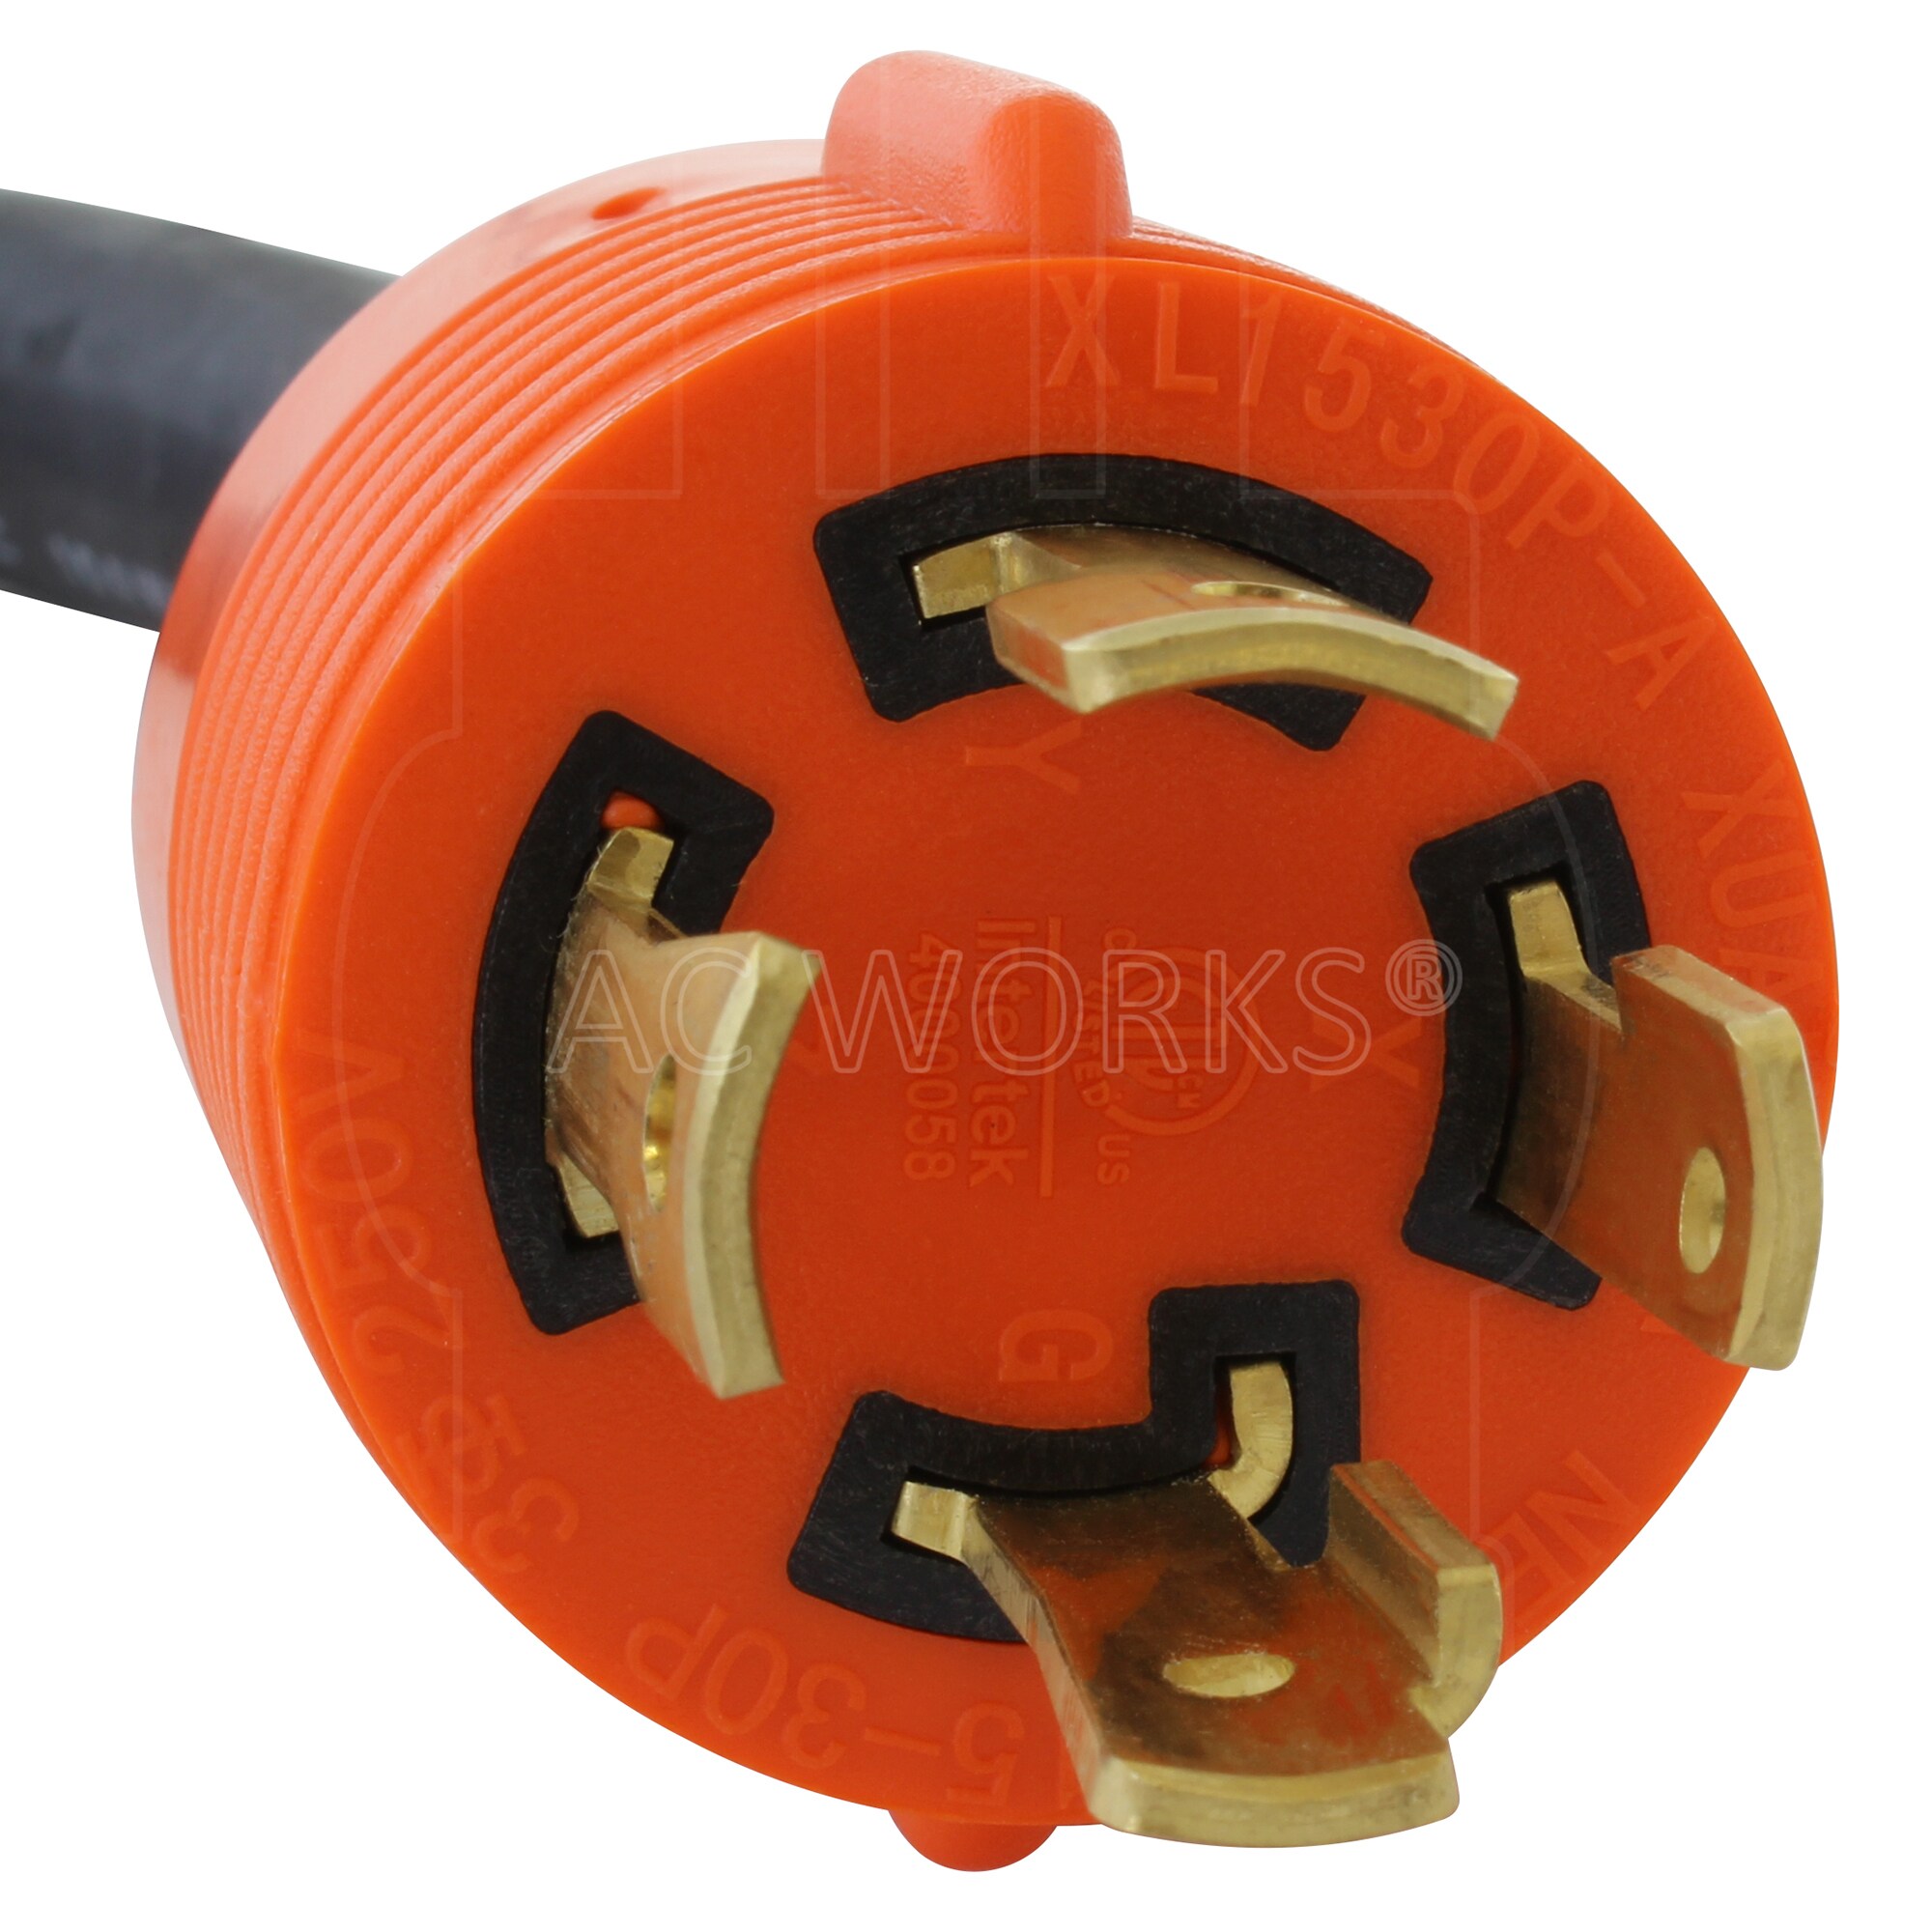 AC WORKS 30 Amp 3-Prong 10-30P Dryer Plug to L6-30R 30 Amp 250